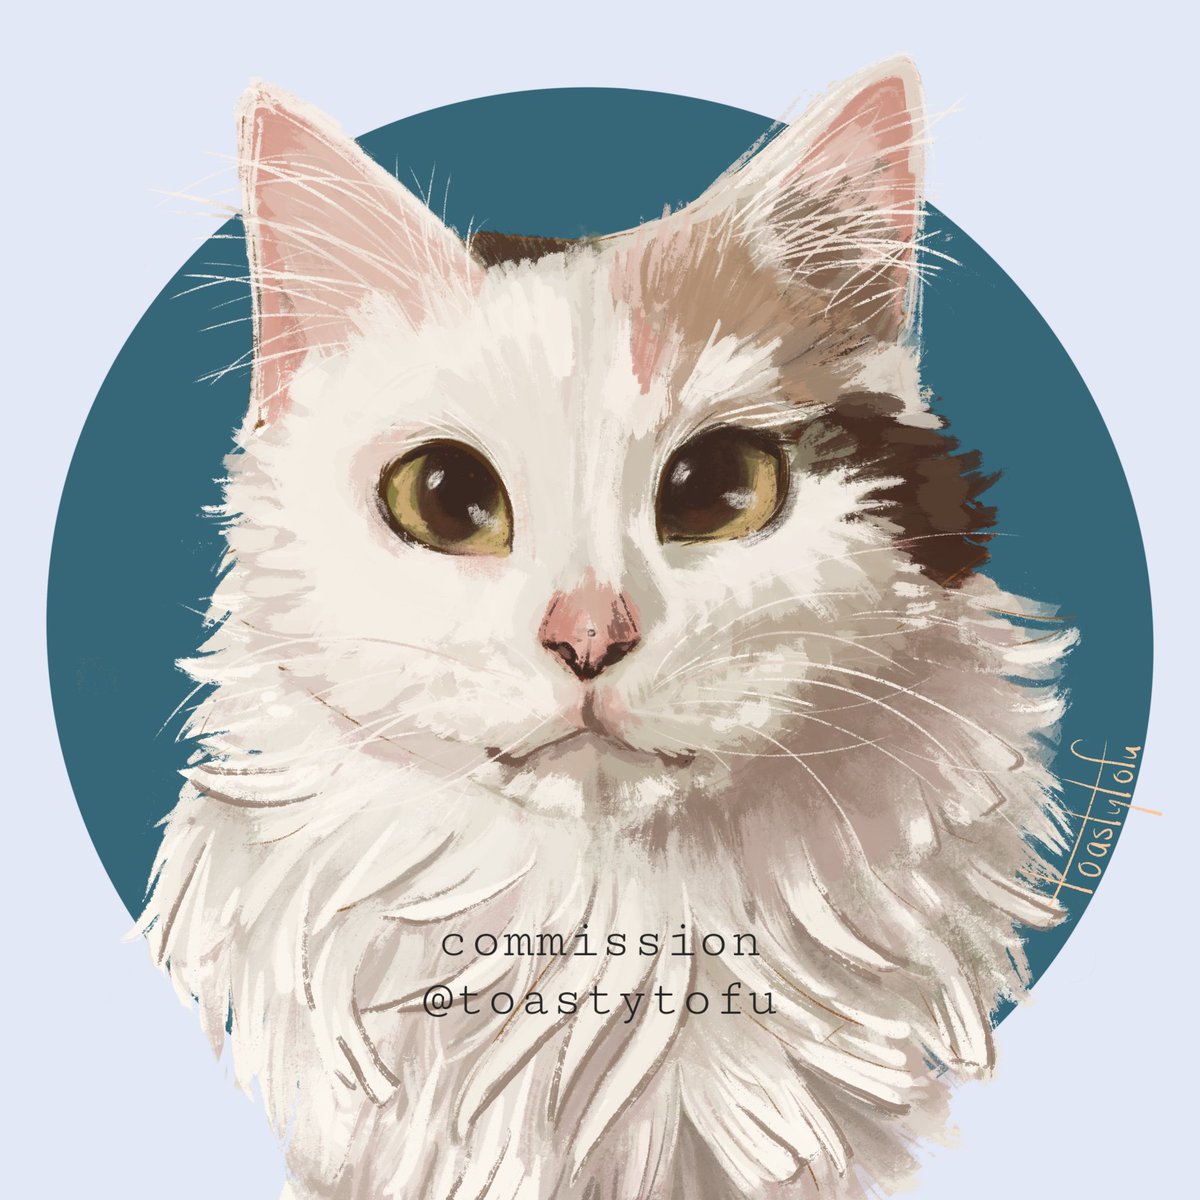 A little break from stray kids with some pet portraits!! Thank you for letting me paint your beautiful cat!

#procreate #petportrait #petportraitartist #catportrait #digitalpainting